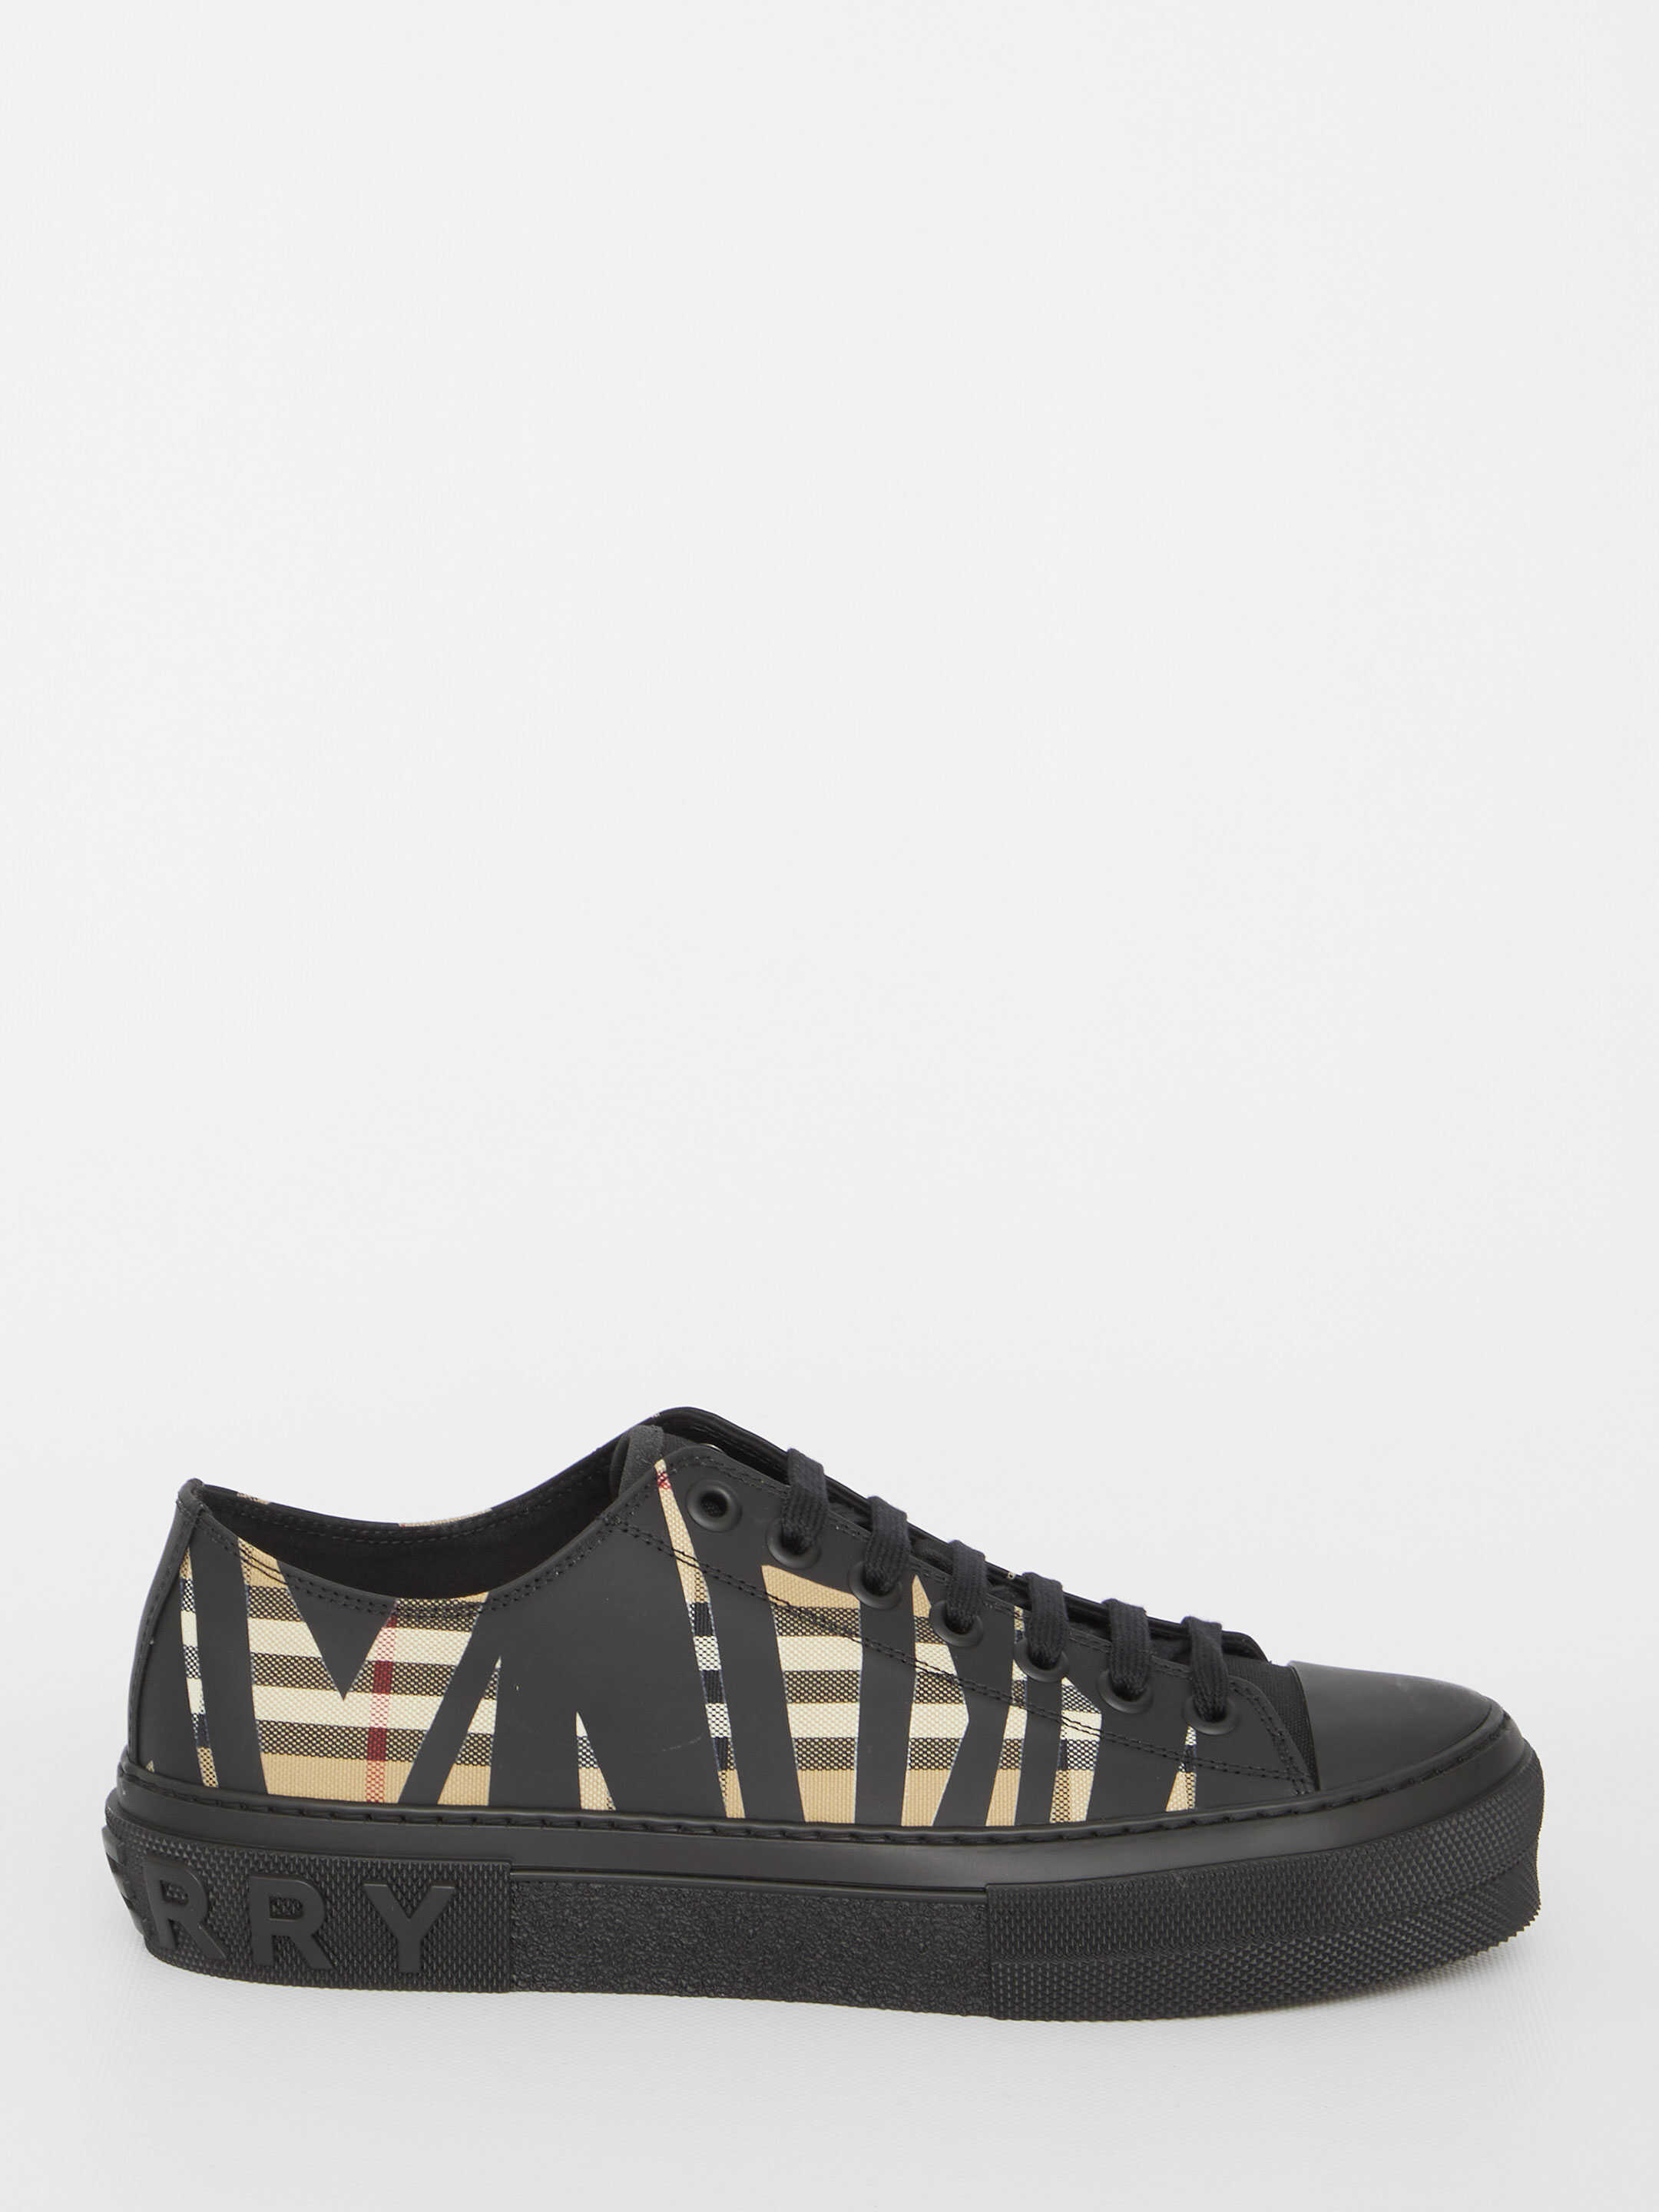 Burberry Check Motif Sneakers BEIGE image15